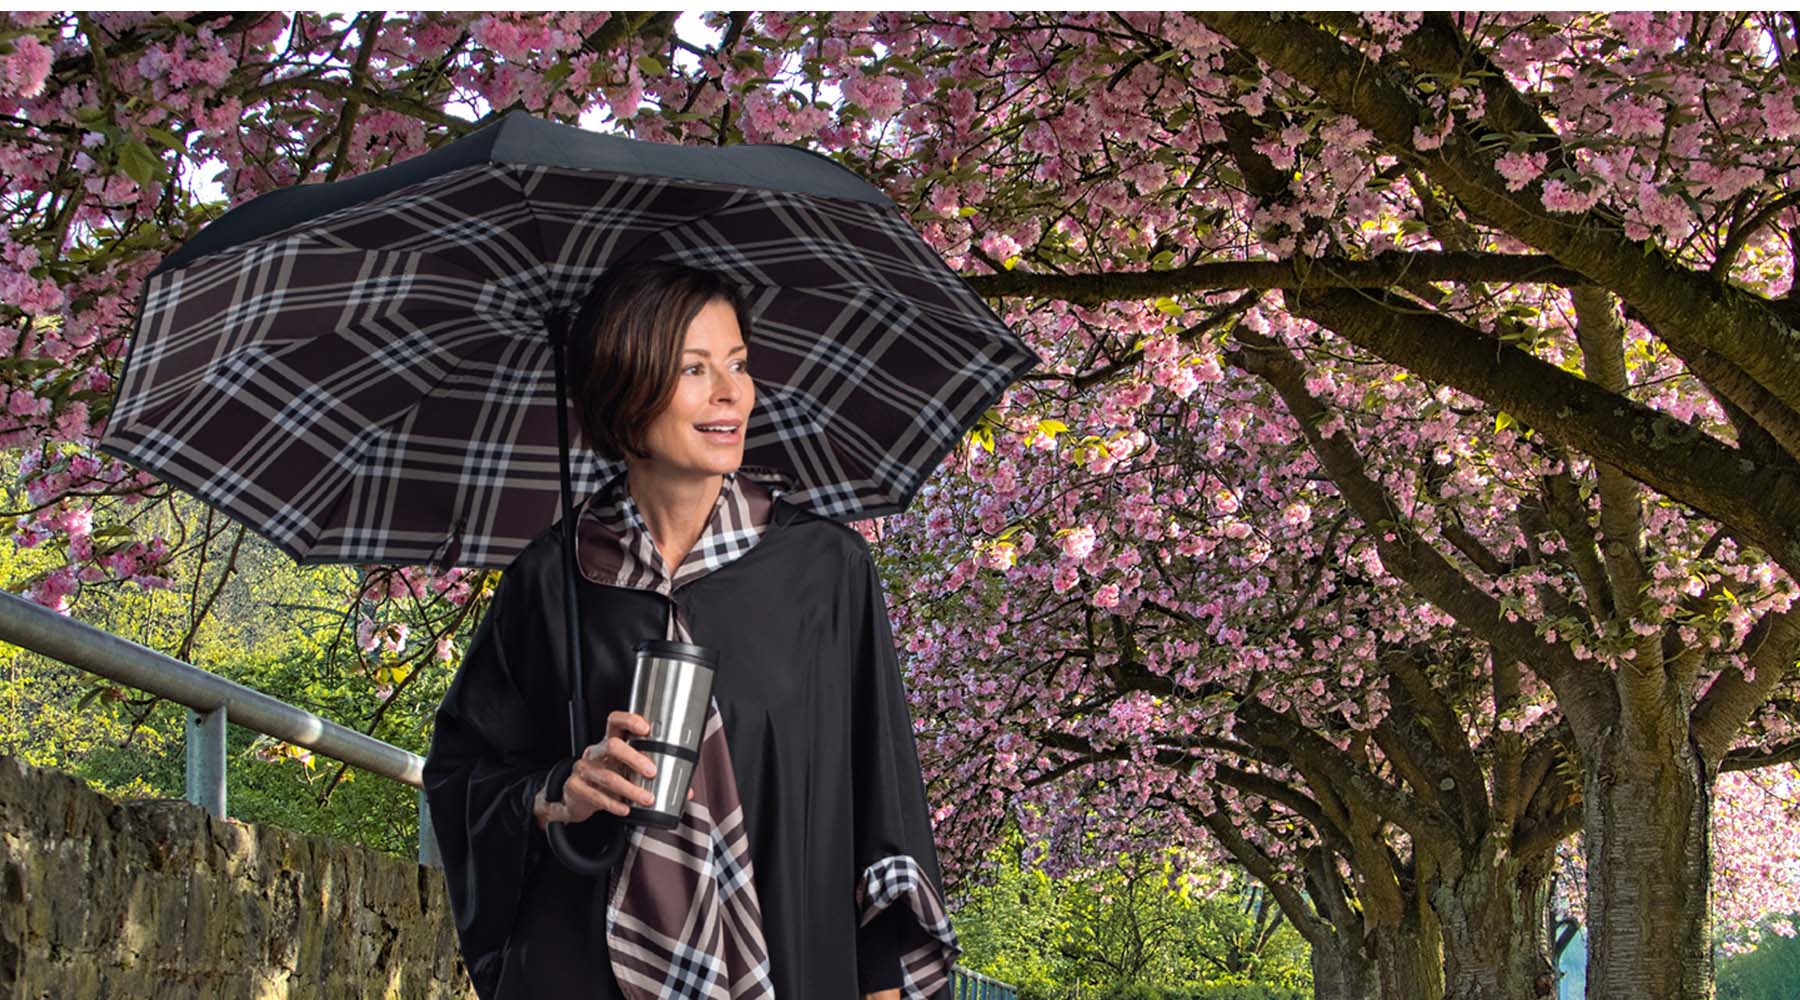 Coco plaid RainCaper and Coco Plaid reverse umbrella on a woman standing under a bloom of cherry trees